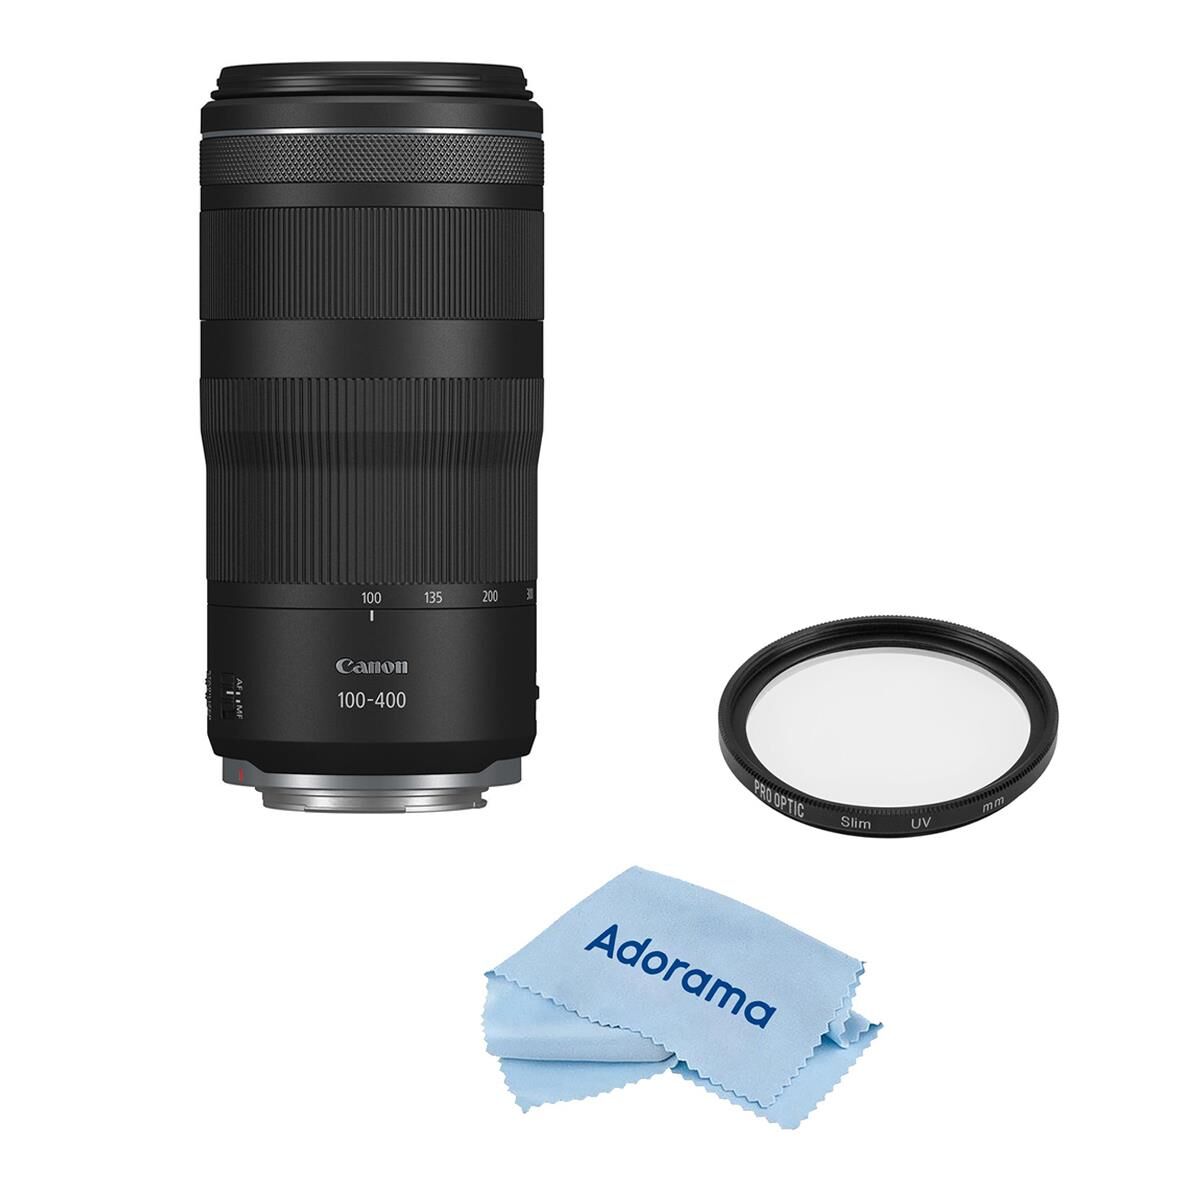 Canon RF 100-400mm f/5.6-8 IS USM Lens with Accessories Kit